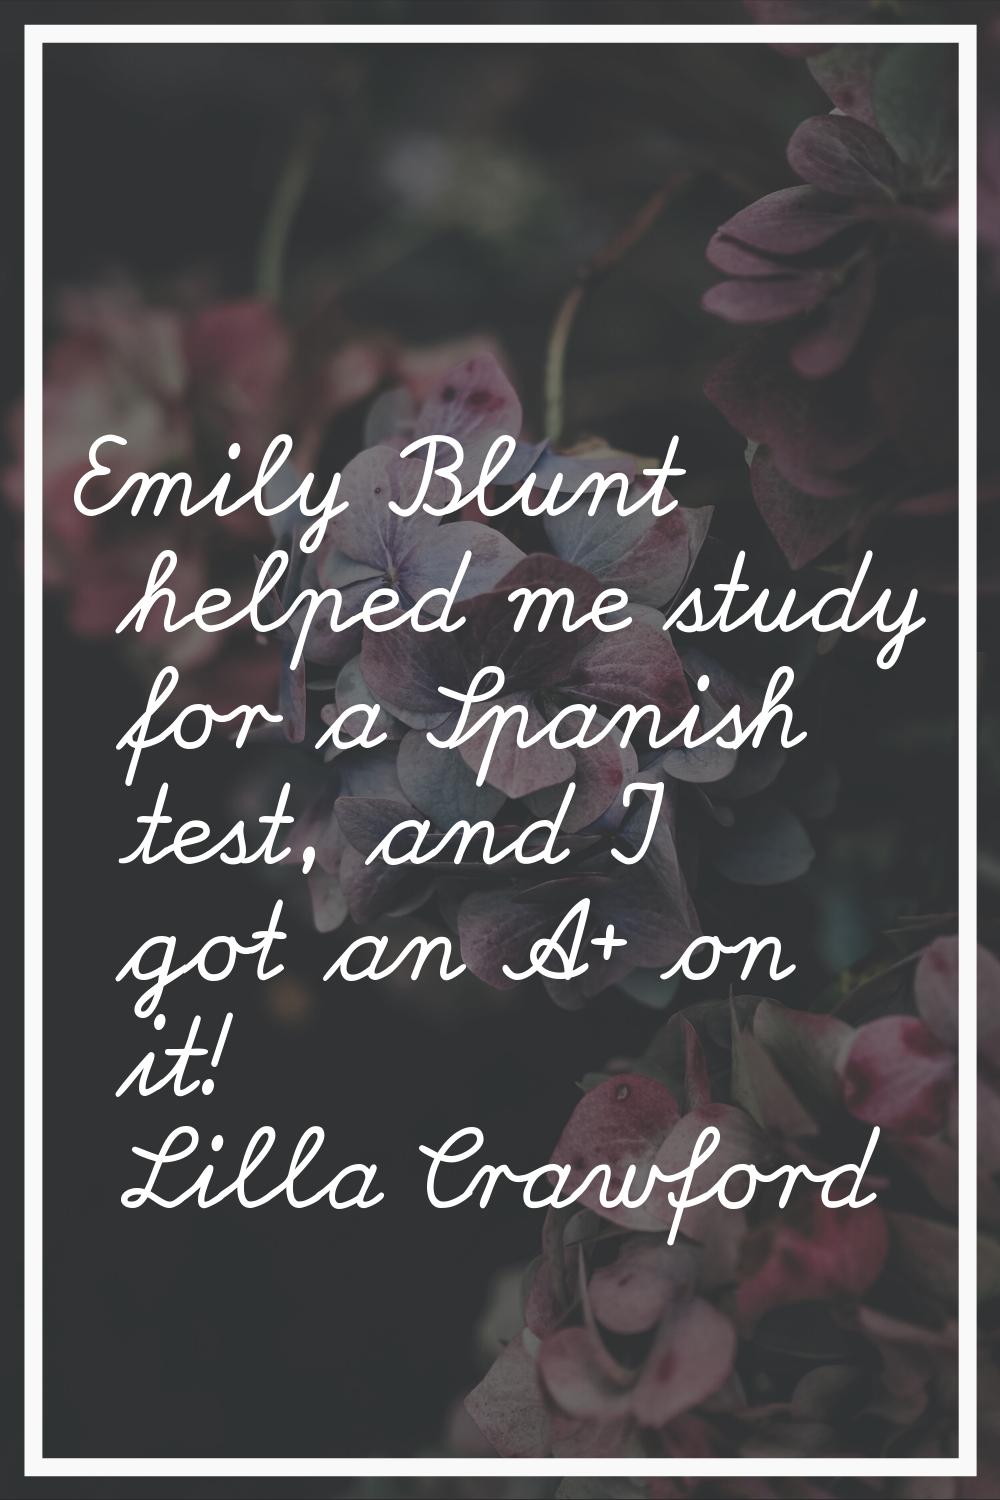 Emily Blunt helped me study for a Spanish test, and I got an A+ on it!